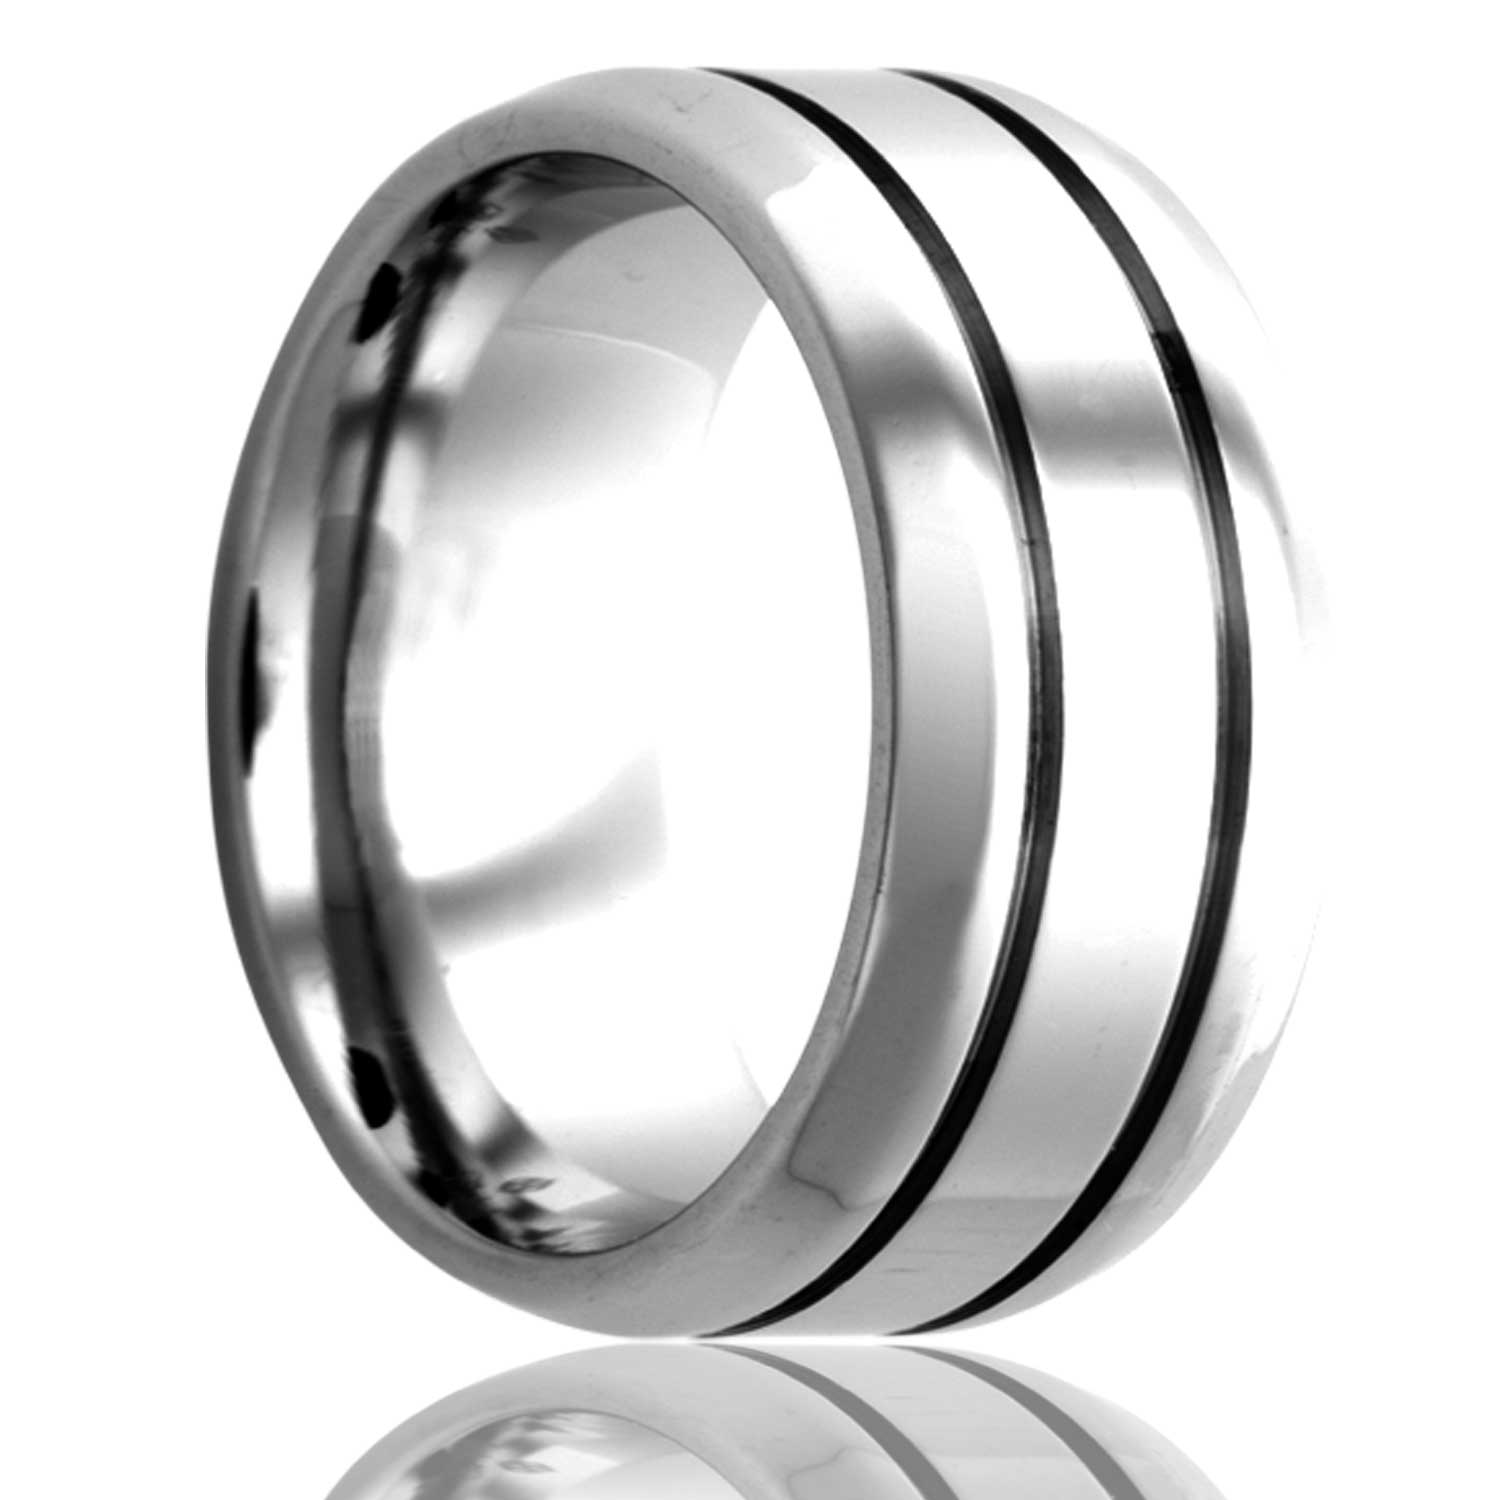 A grooved cobalt wedding band with beveled edges displayed on a neutral white background.